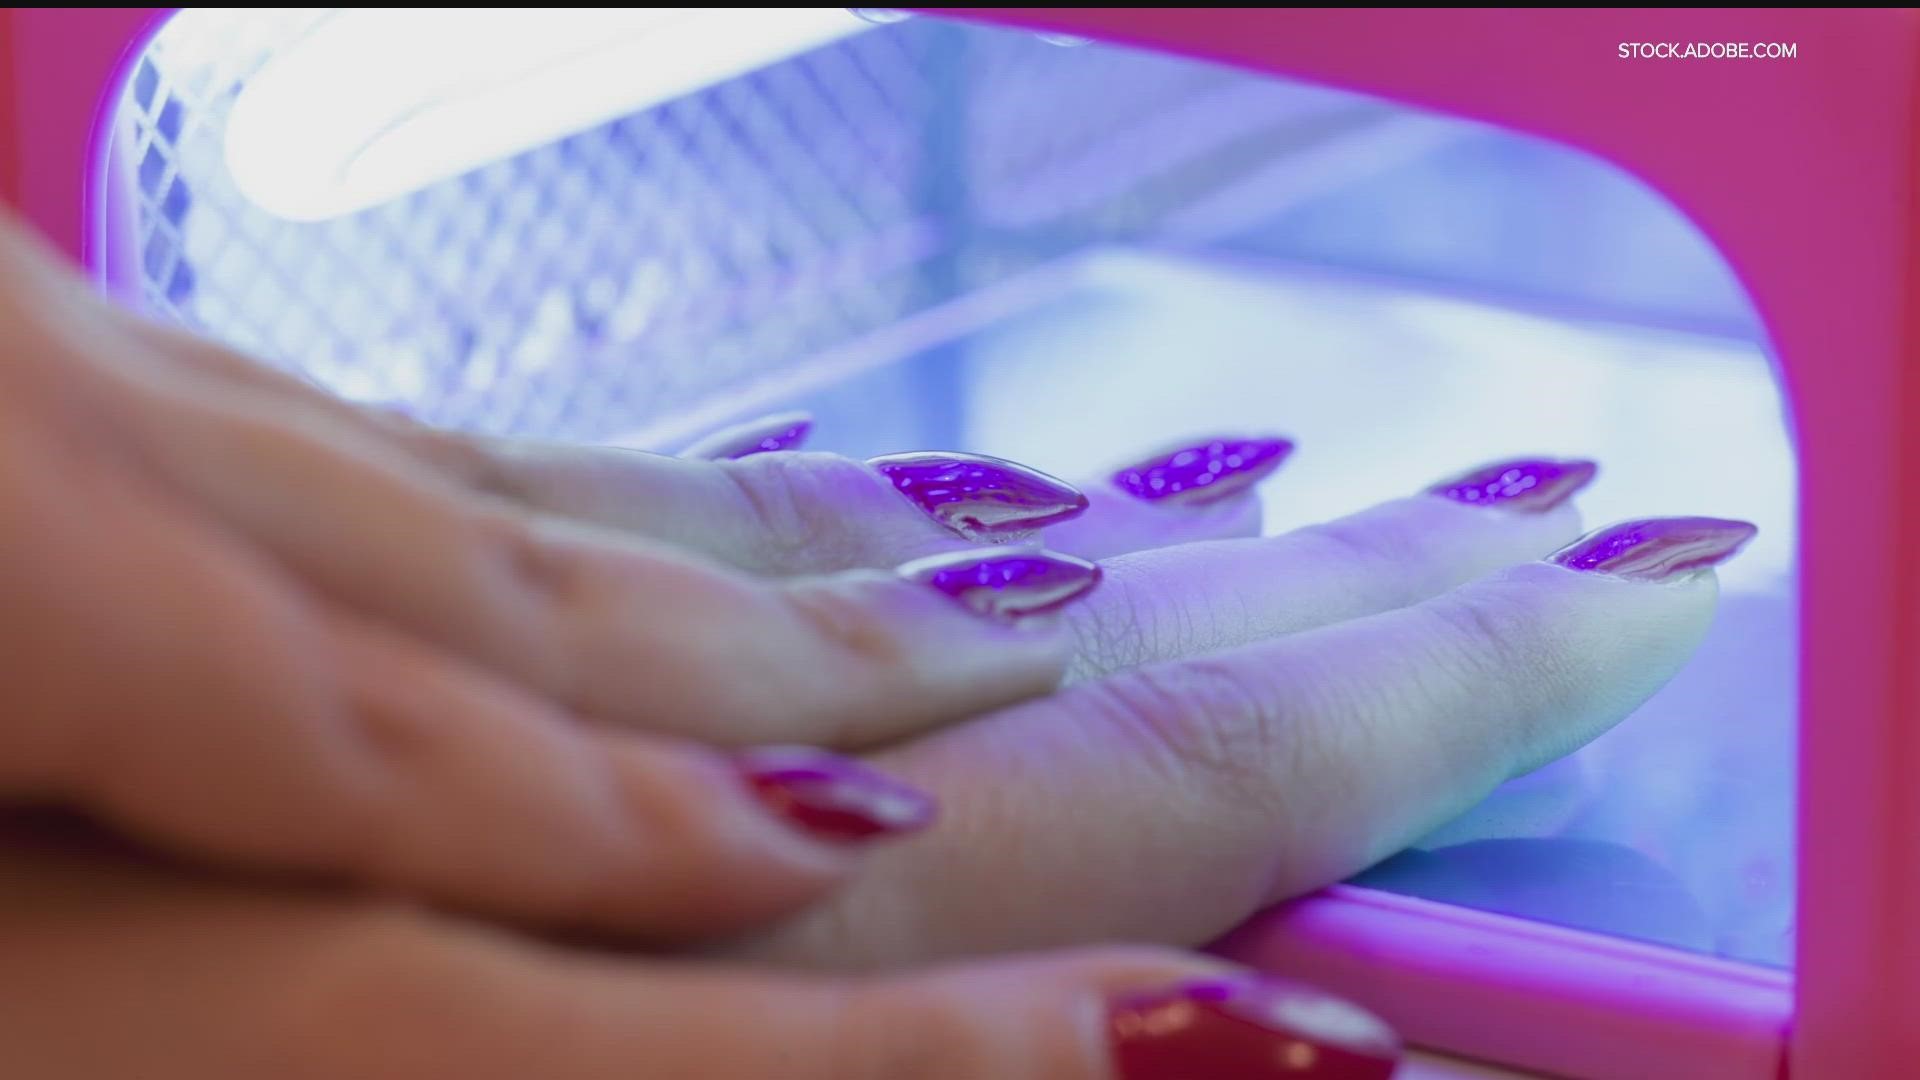 After a recent study found a possible link between nail dryers emitting UV light and potentially cancerous DNA mutations, a salon owner shares her natural methods.